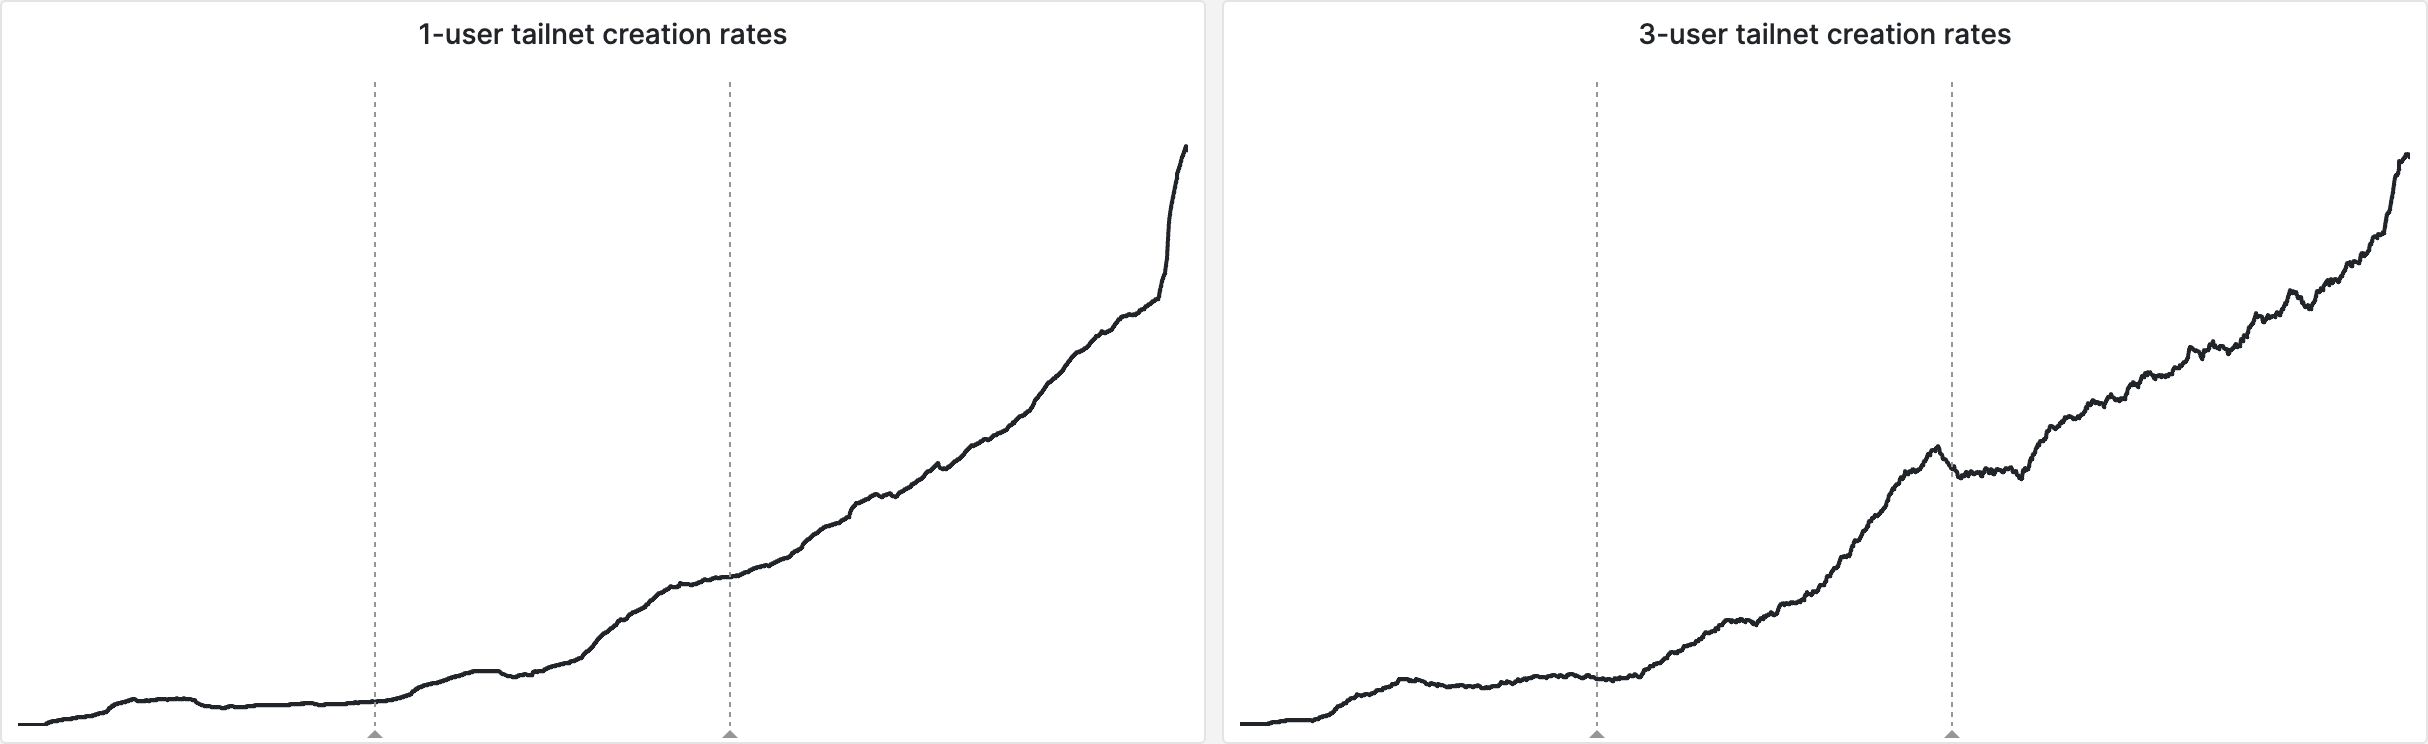 Moving-average rate of creation (i.e. first derivative) of new 1-user vs 3-user tailnets over a long period (note: different y axis scales). Notice the accelerating curve of the first and the linear increase of the latter.